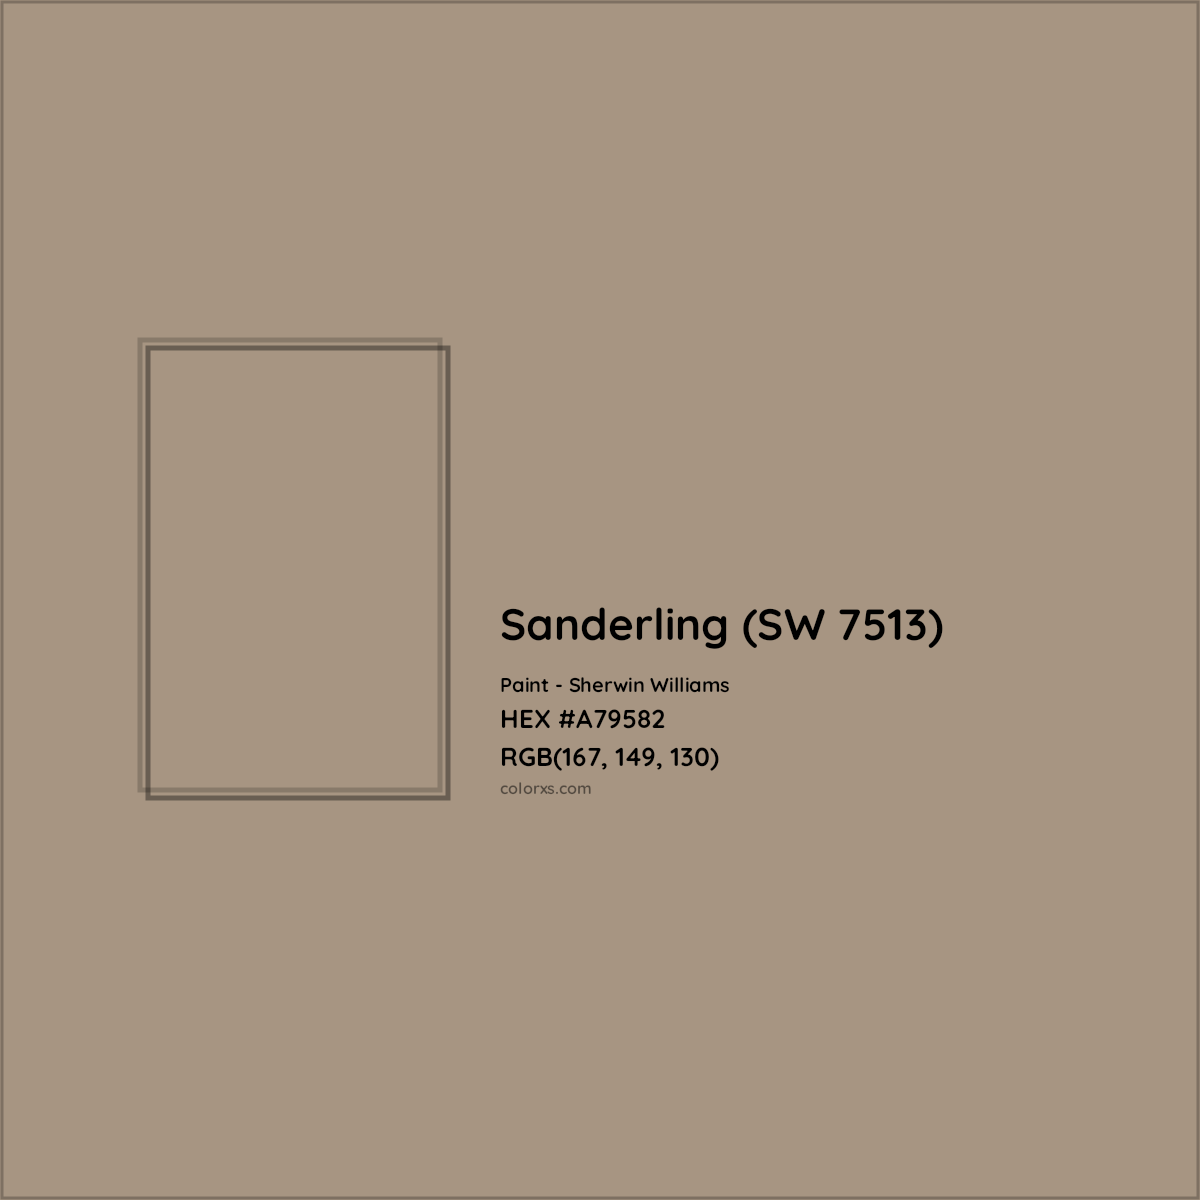 HEX #A79582 Sanderling (SW 7513) Paint Sherwin Williams - Color Code